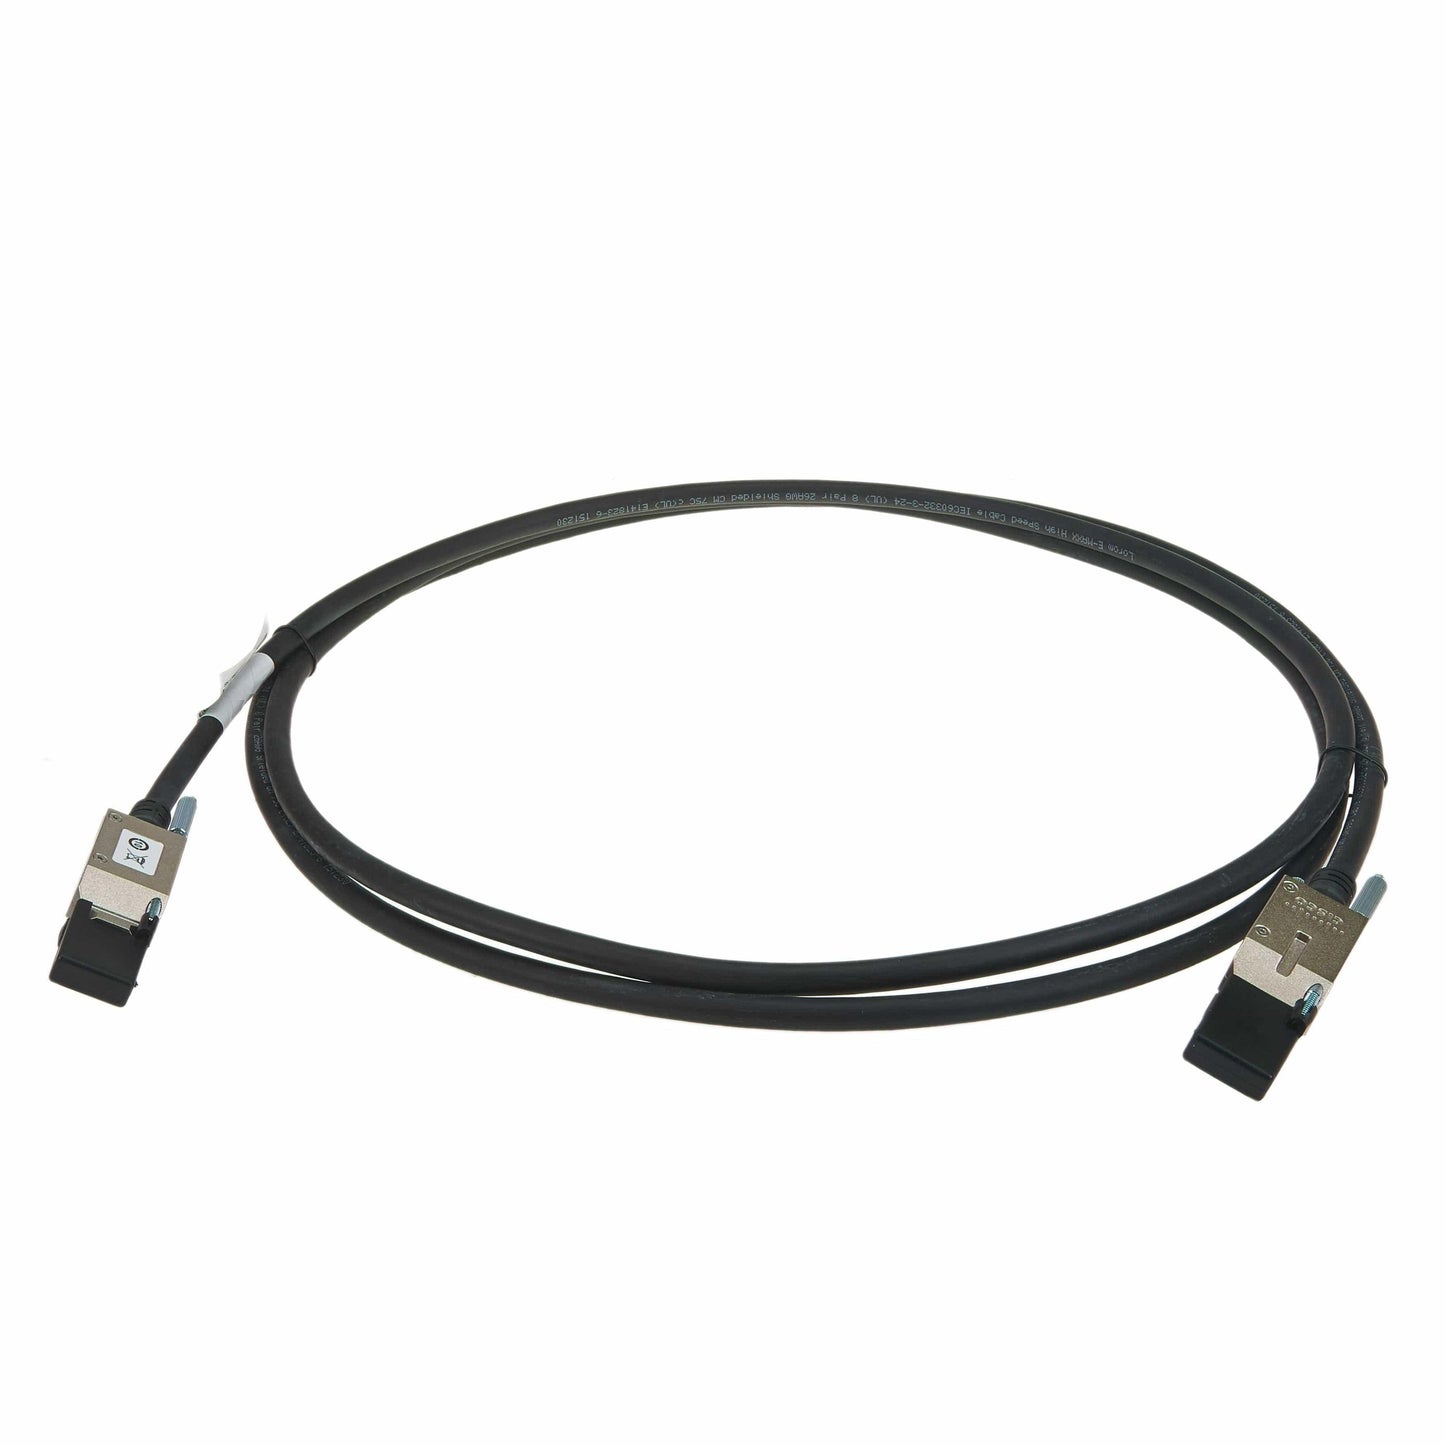 Cisco 3M type 2 stacking cable for the Cisco 3650 switch - STACK-T2-3M refurbished - STACK-T2-3M-R - Reef Telecom